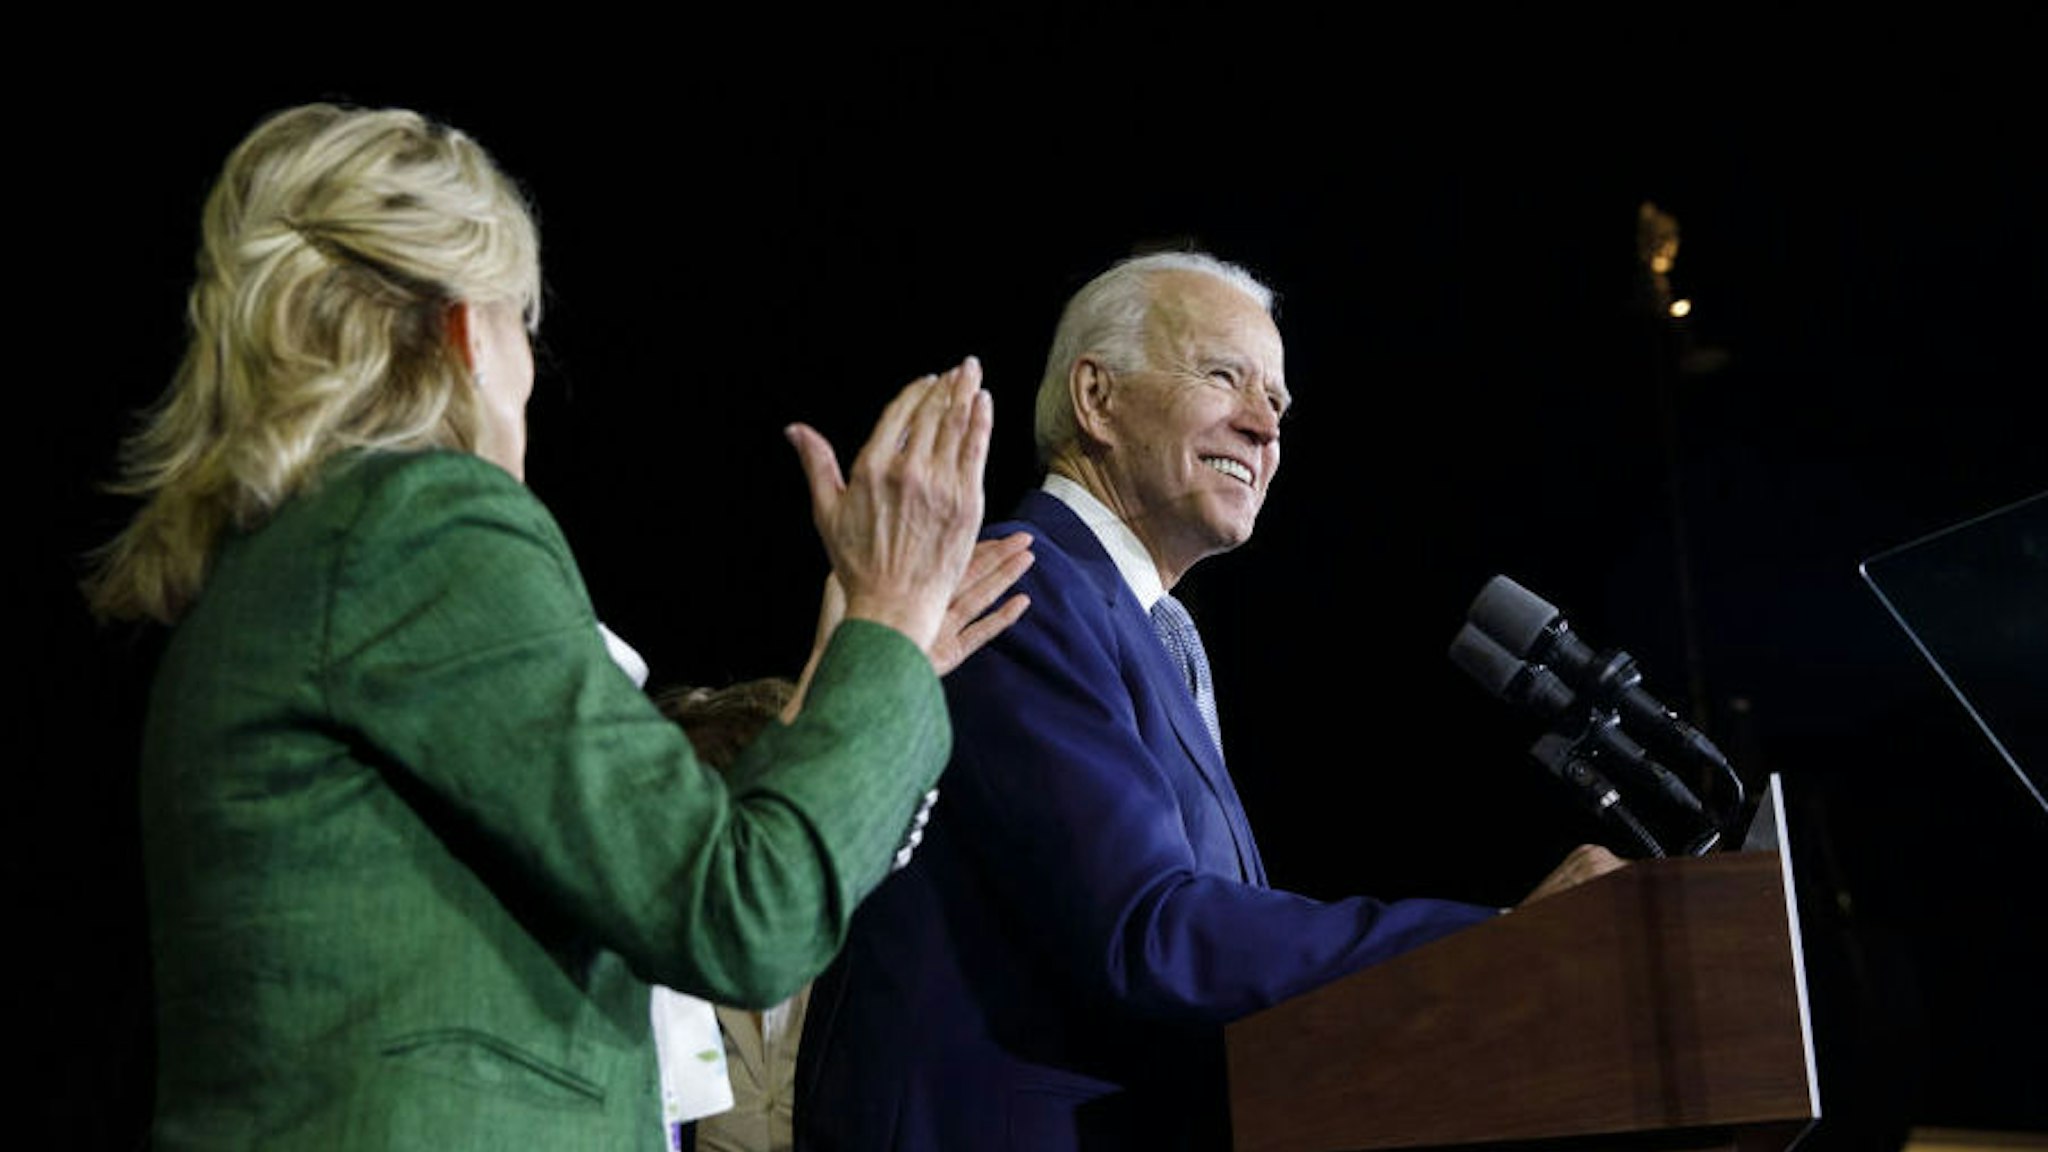 Former Vice President Joe Biden, 2020 Democratic presidential candidate, smiles during a primary night rally in the Baldwin Hills neighborhood of Los Angeles, California, U.S., on Tuesday, March 3, 2020. The biggest day of the presidential primary calendar will define the nomination fight for Bernie Sanders and Biden and determine whether Michael Bloomberg and Elizabeth Warren have a rationale for carrying on their campaigns. Photographer: Patrick T. Fallon/Bloomberg